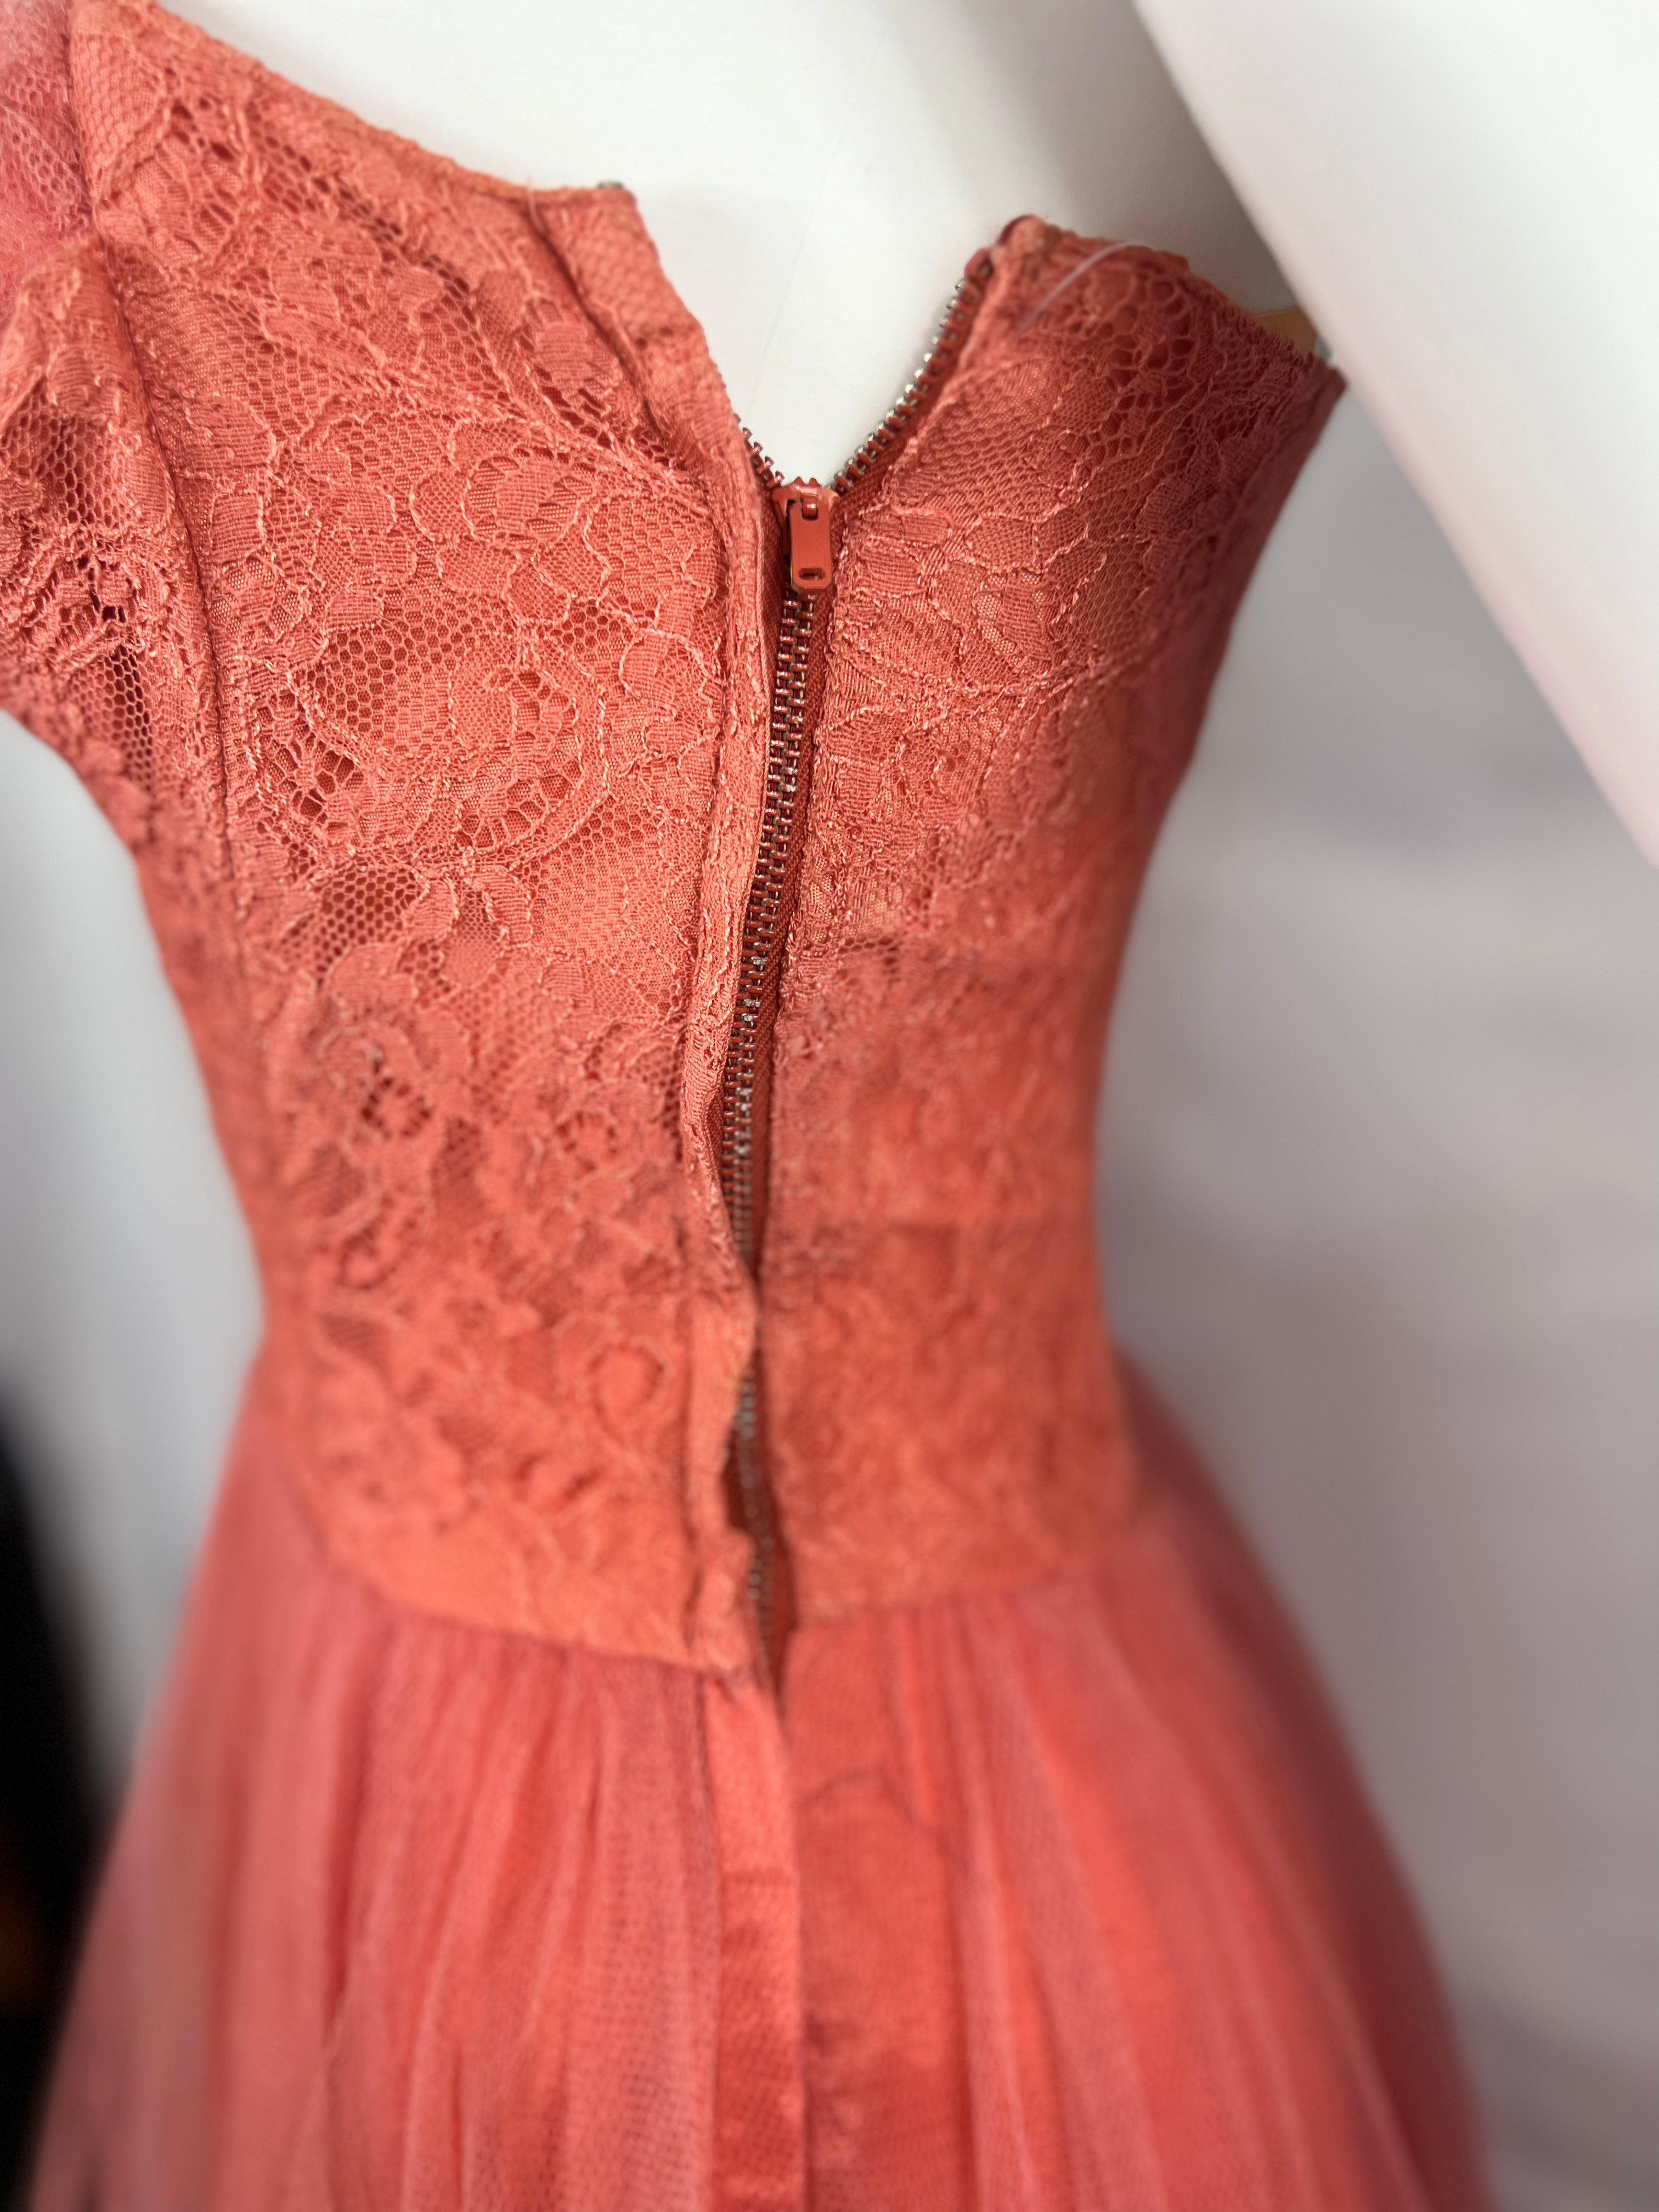 1950's Coral Pink Tulle & Lace Dress